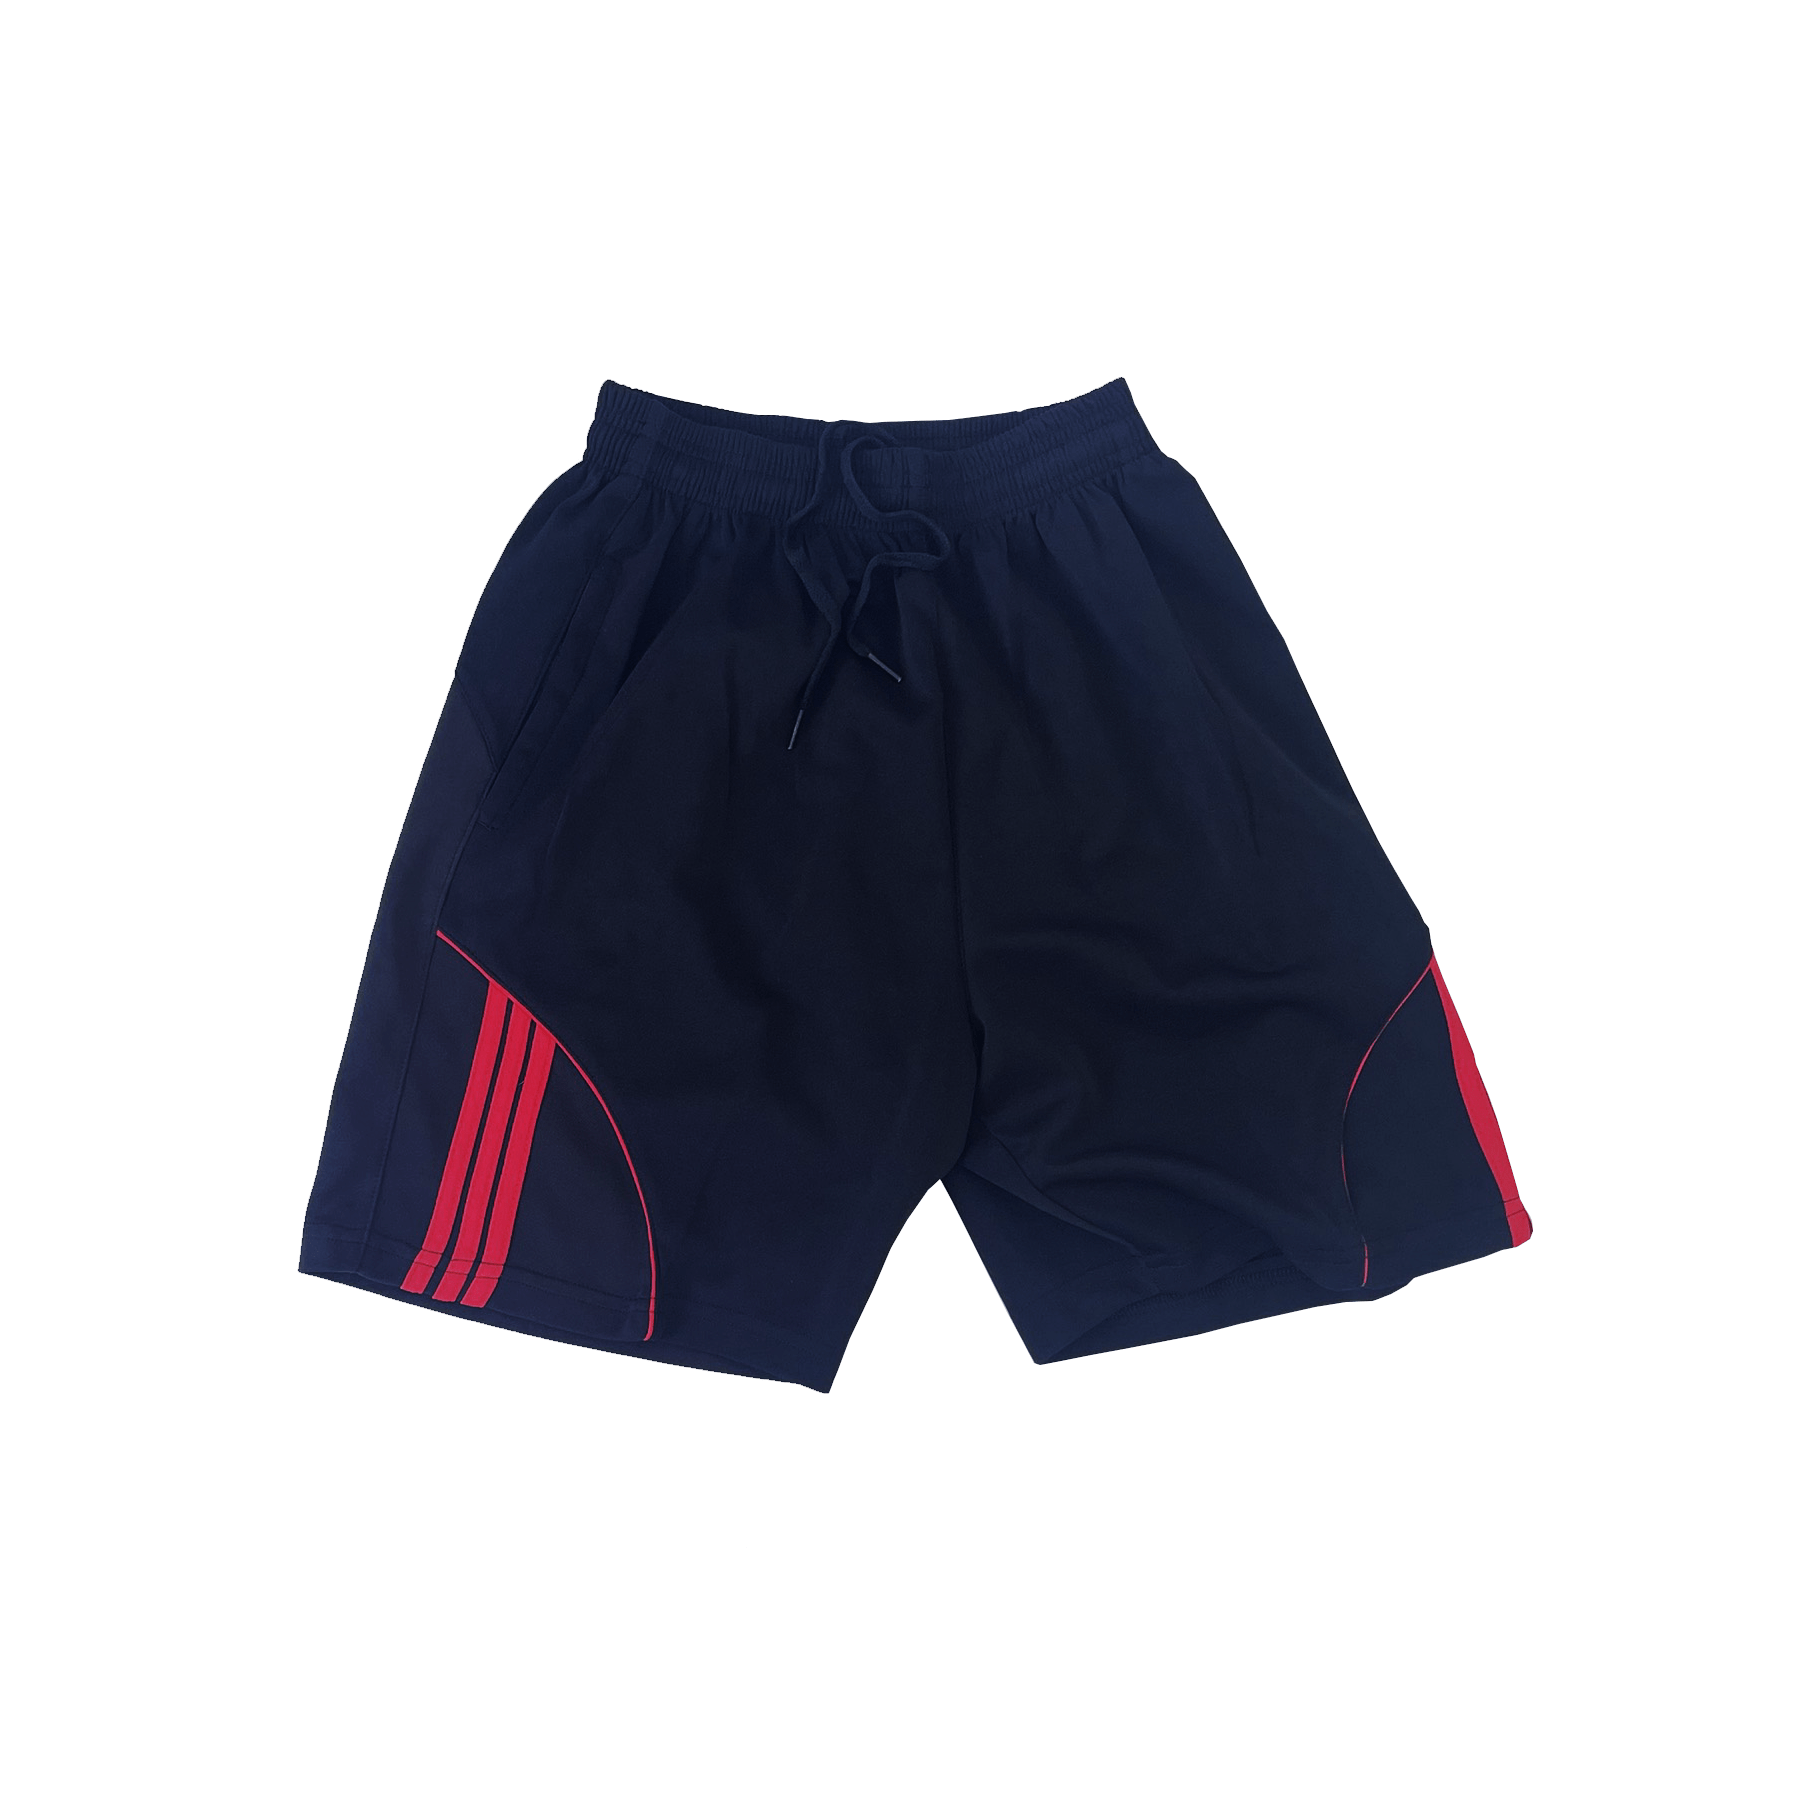 Short Pants For Men Fast Delivery Ready To Ship For Men Odm Each One In Opp Bag From Vietnam Manufacturer